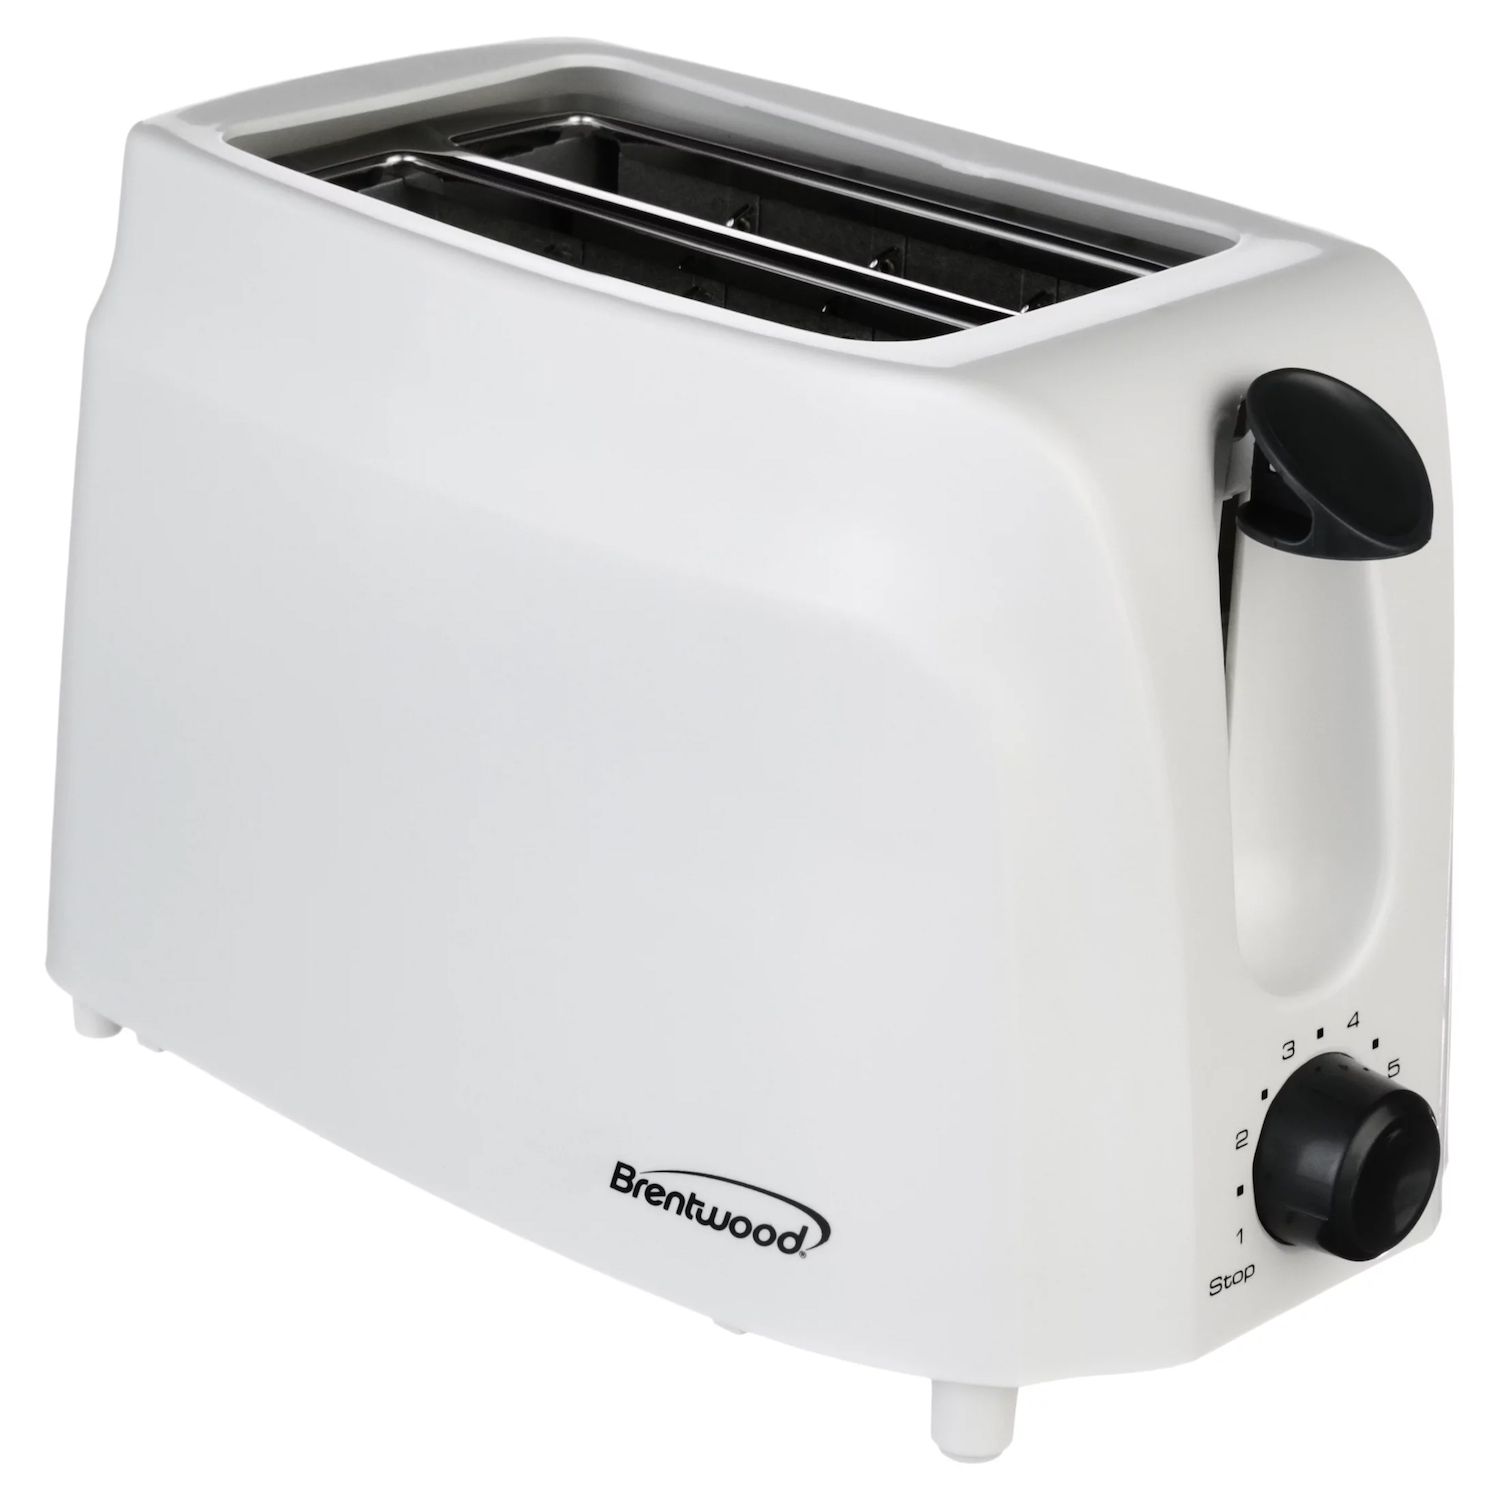 Haden Heritage 1.7 Liter Electric Kettle with 2 Slice Bread Toaster, White